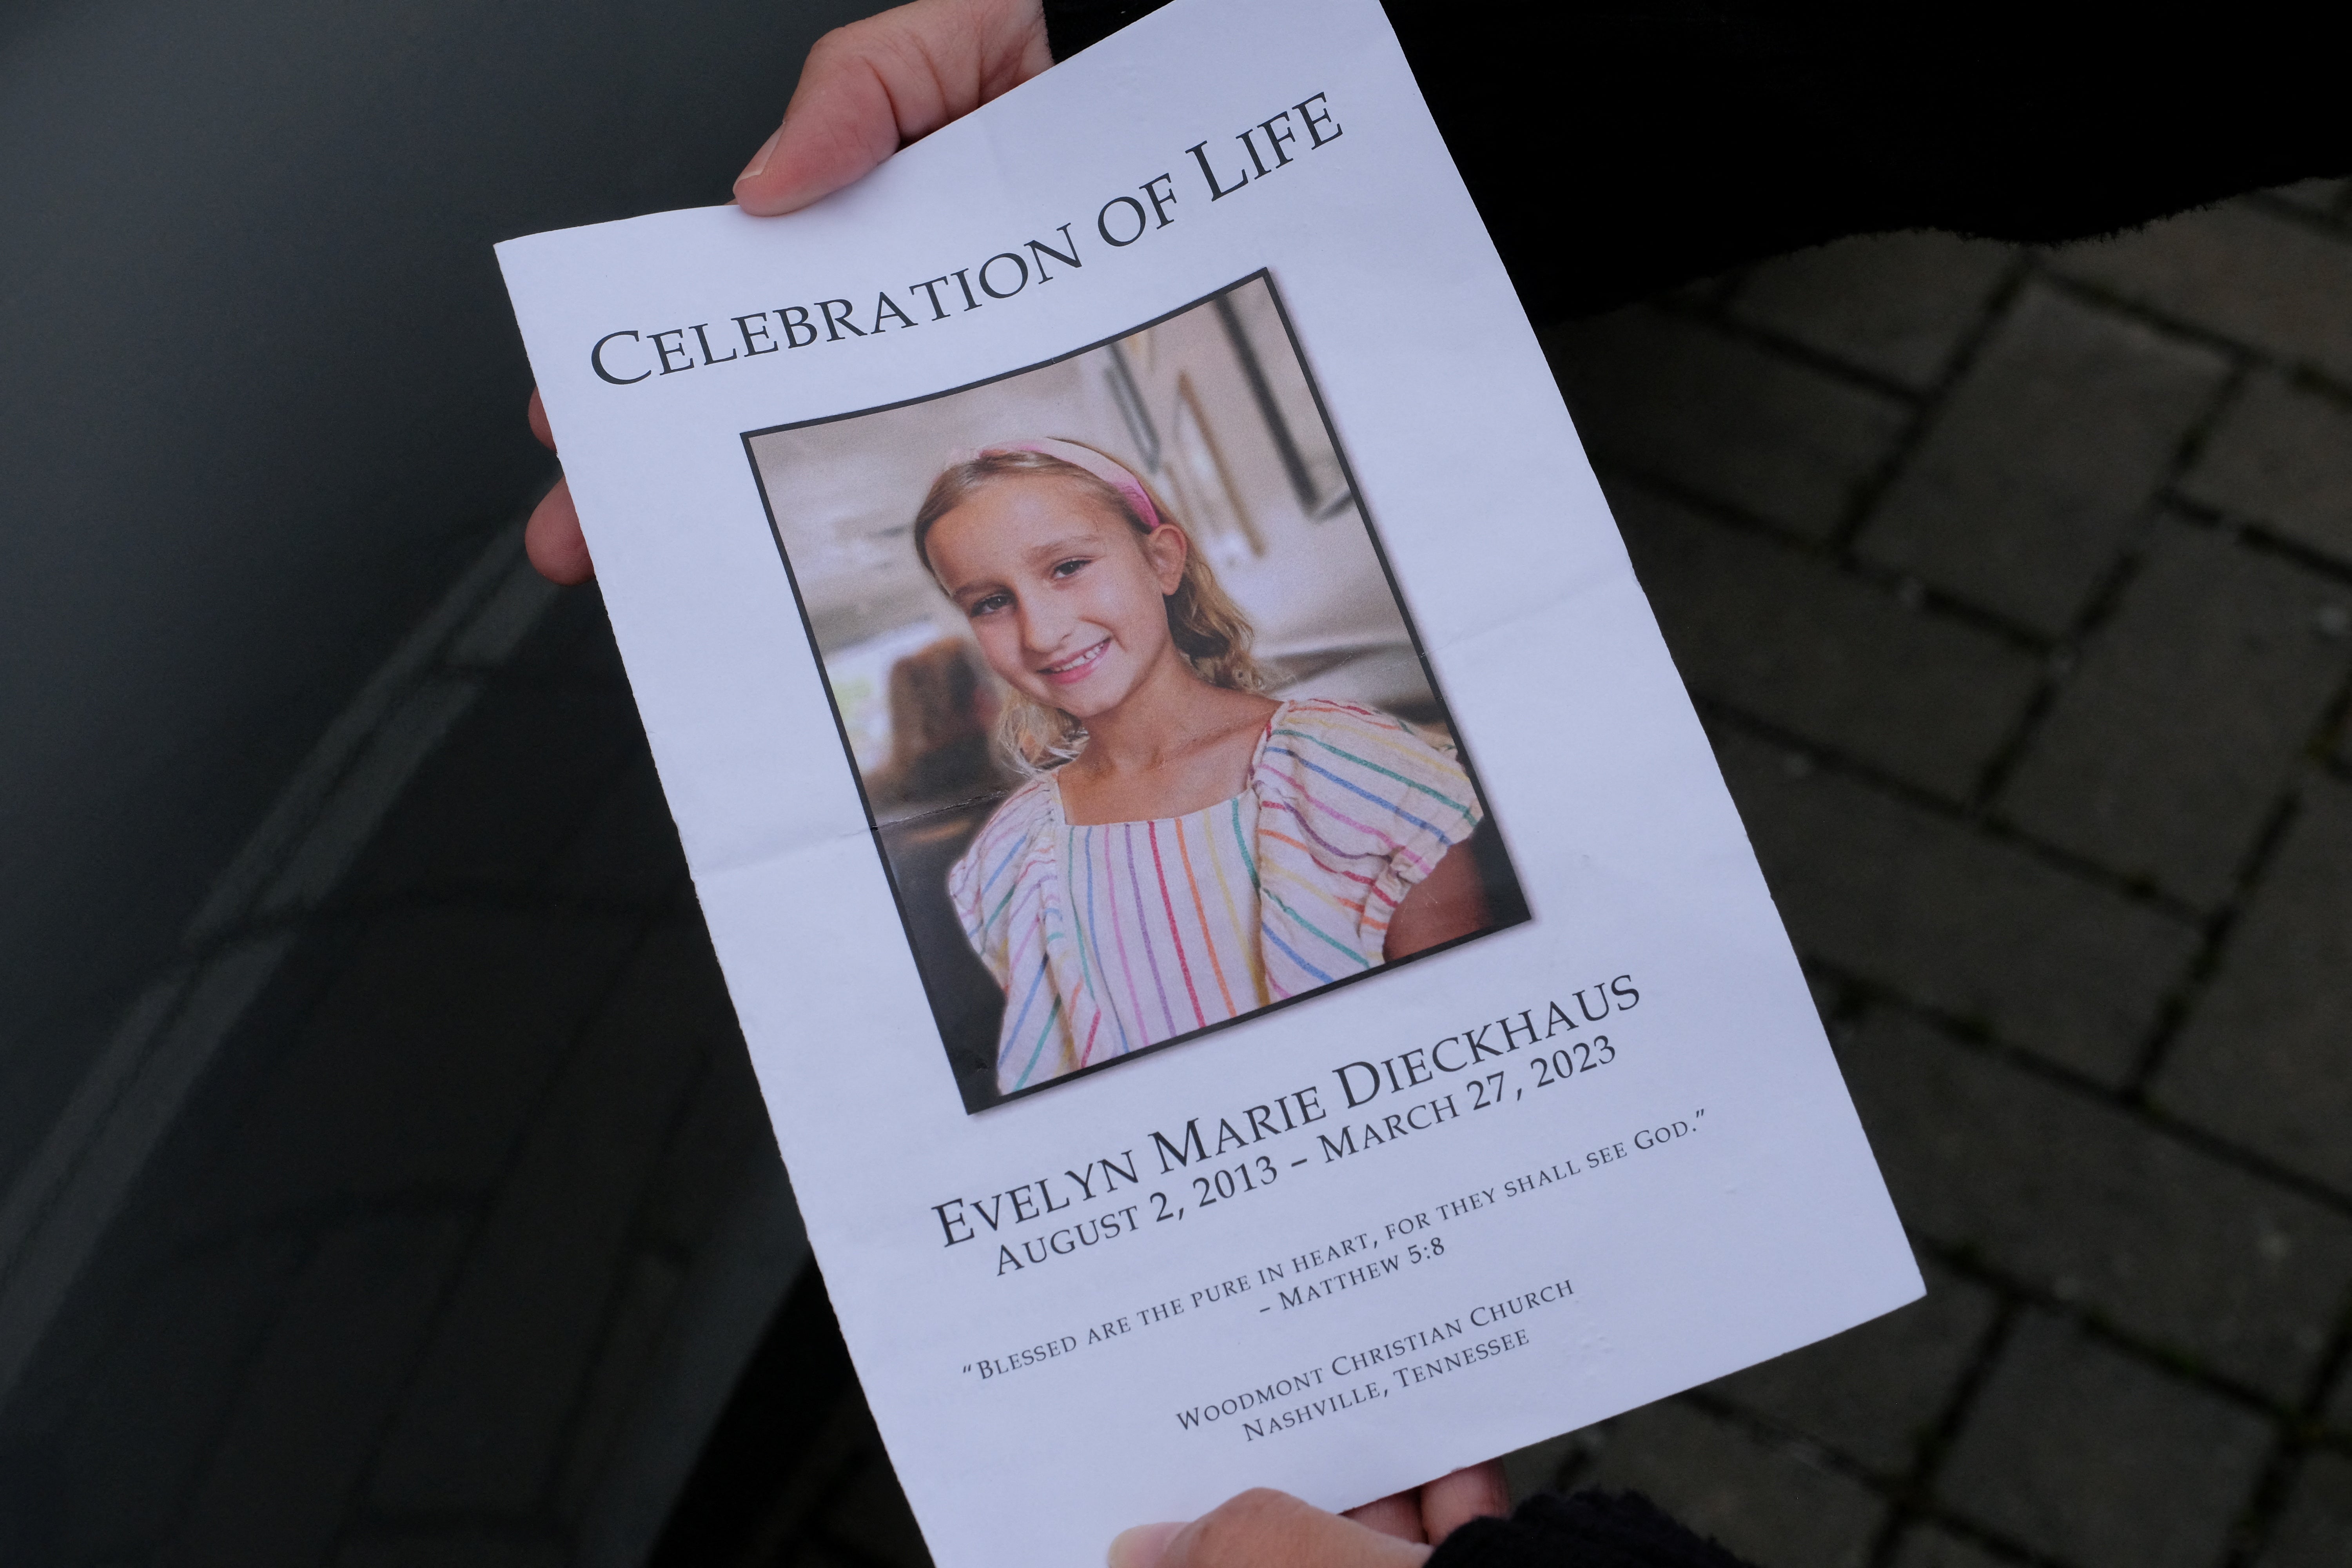 A program of the Celebration of Life for student Evelyn Dieckhaus, nine-year-old, who was killed in a deadly mass shooting at the Covenant School in Nashville, Tennessee